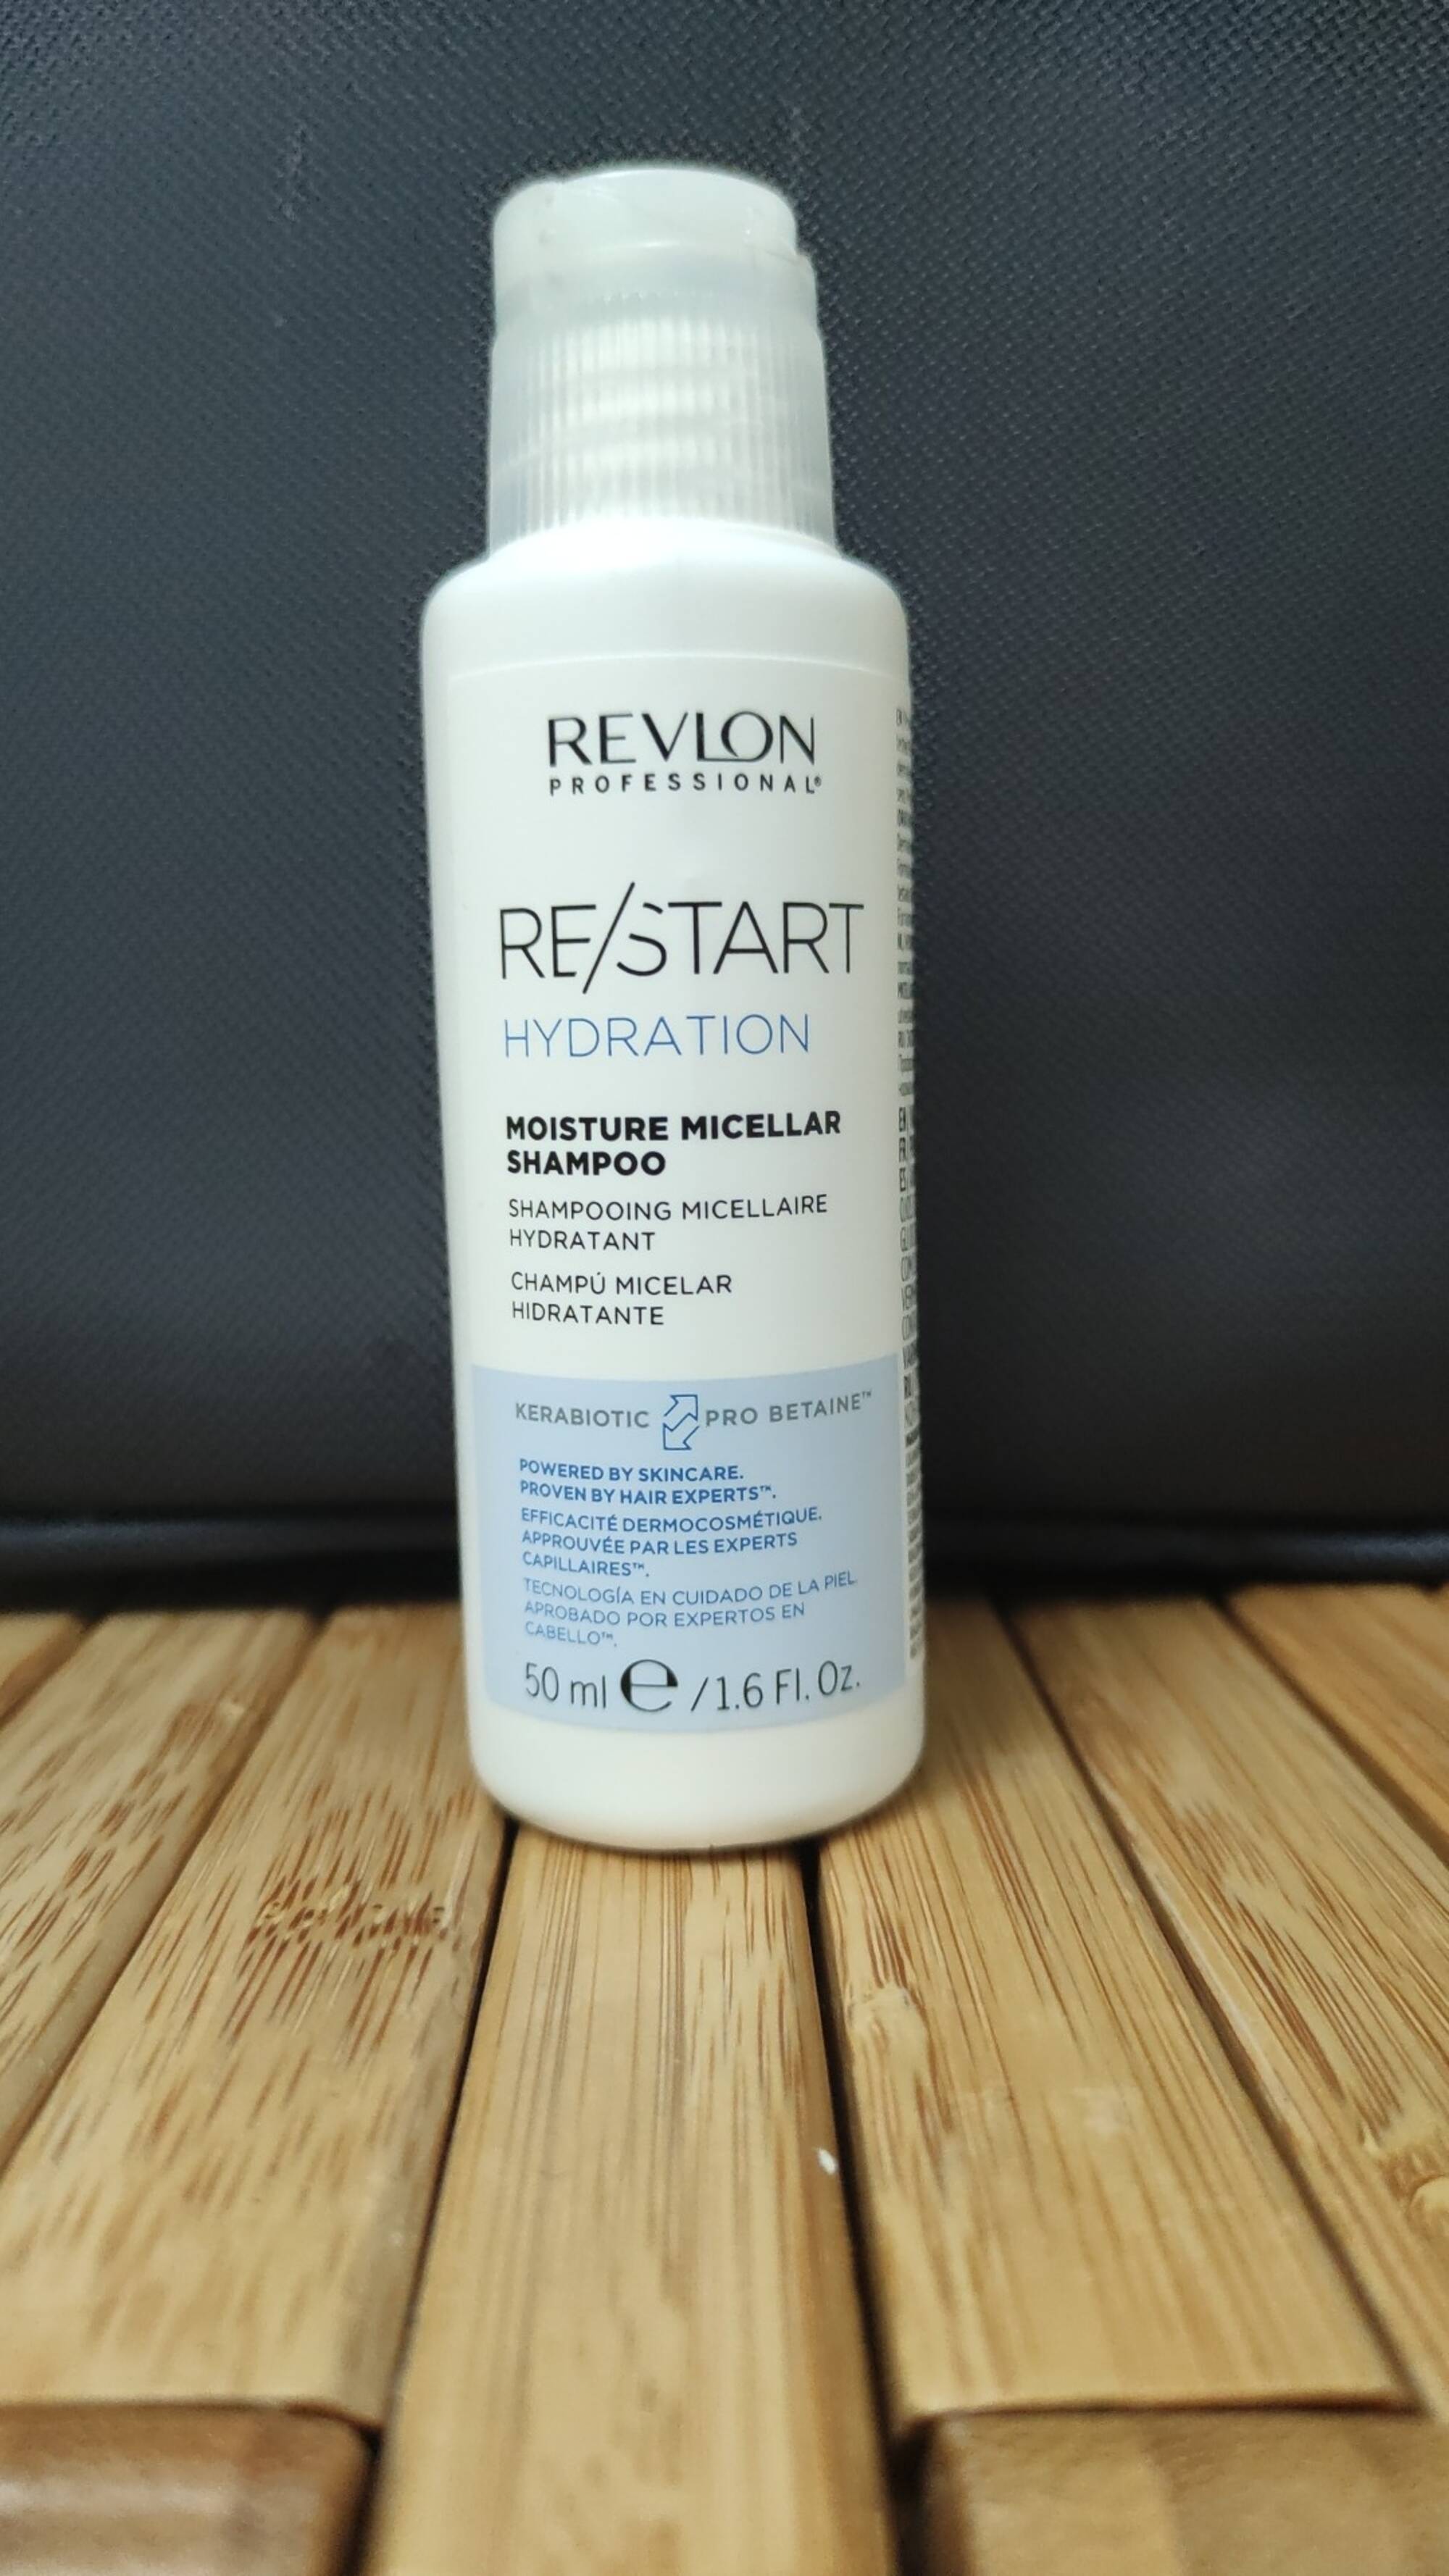 REVLON - Re/Start hydration - Shampooing micellaire hydratant